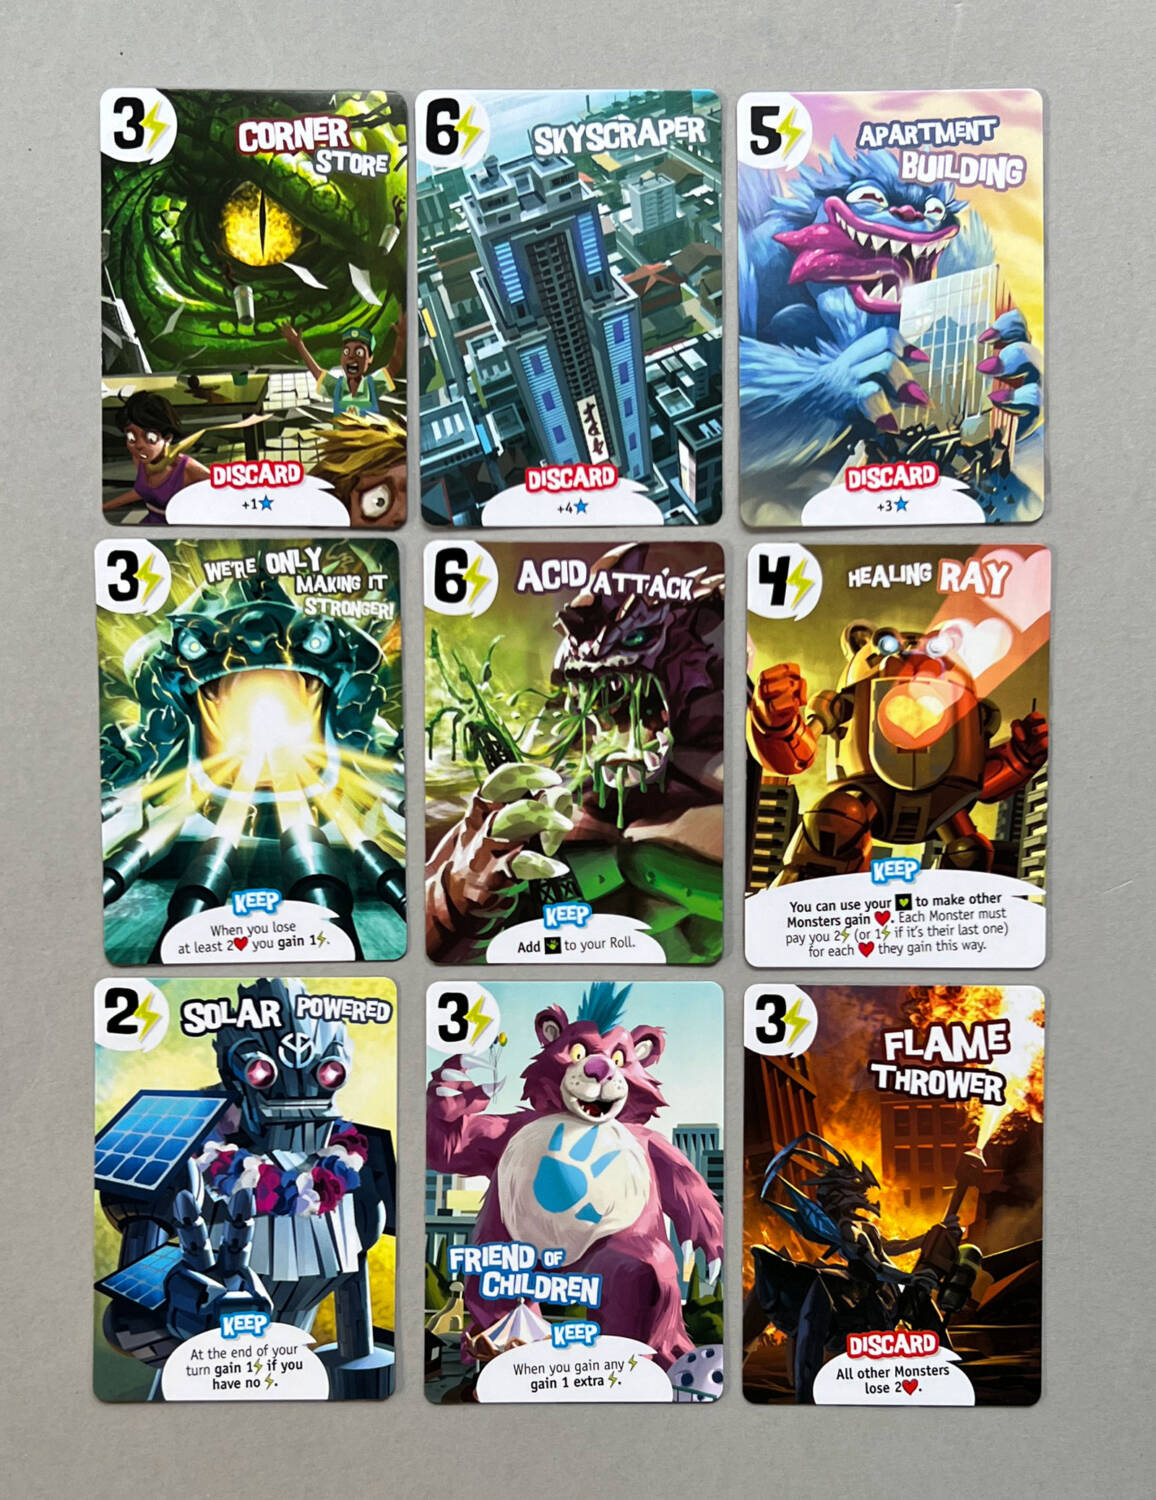 A sampling of the many Monster cards in the box